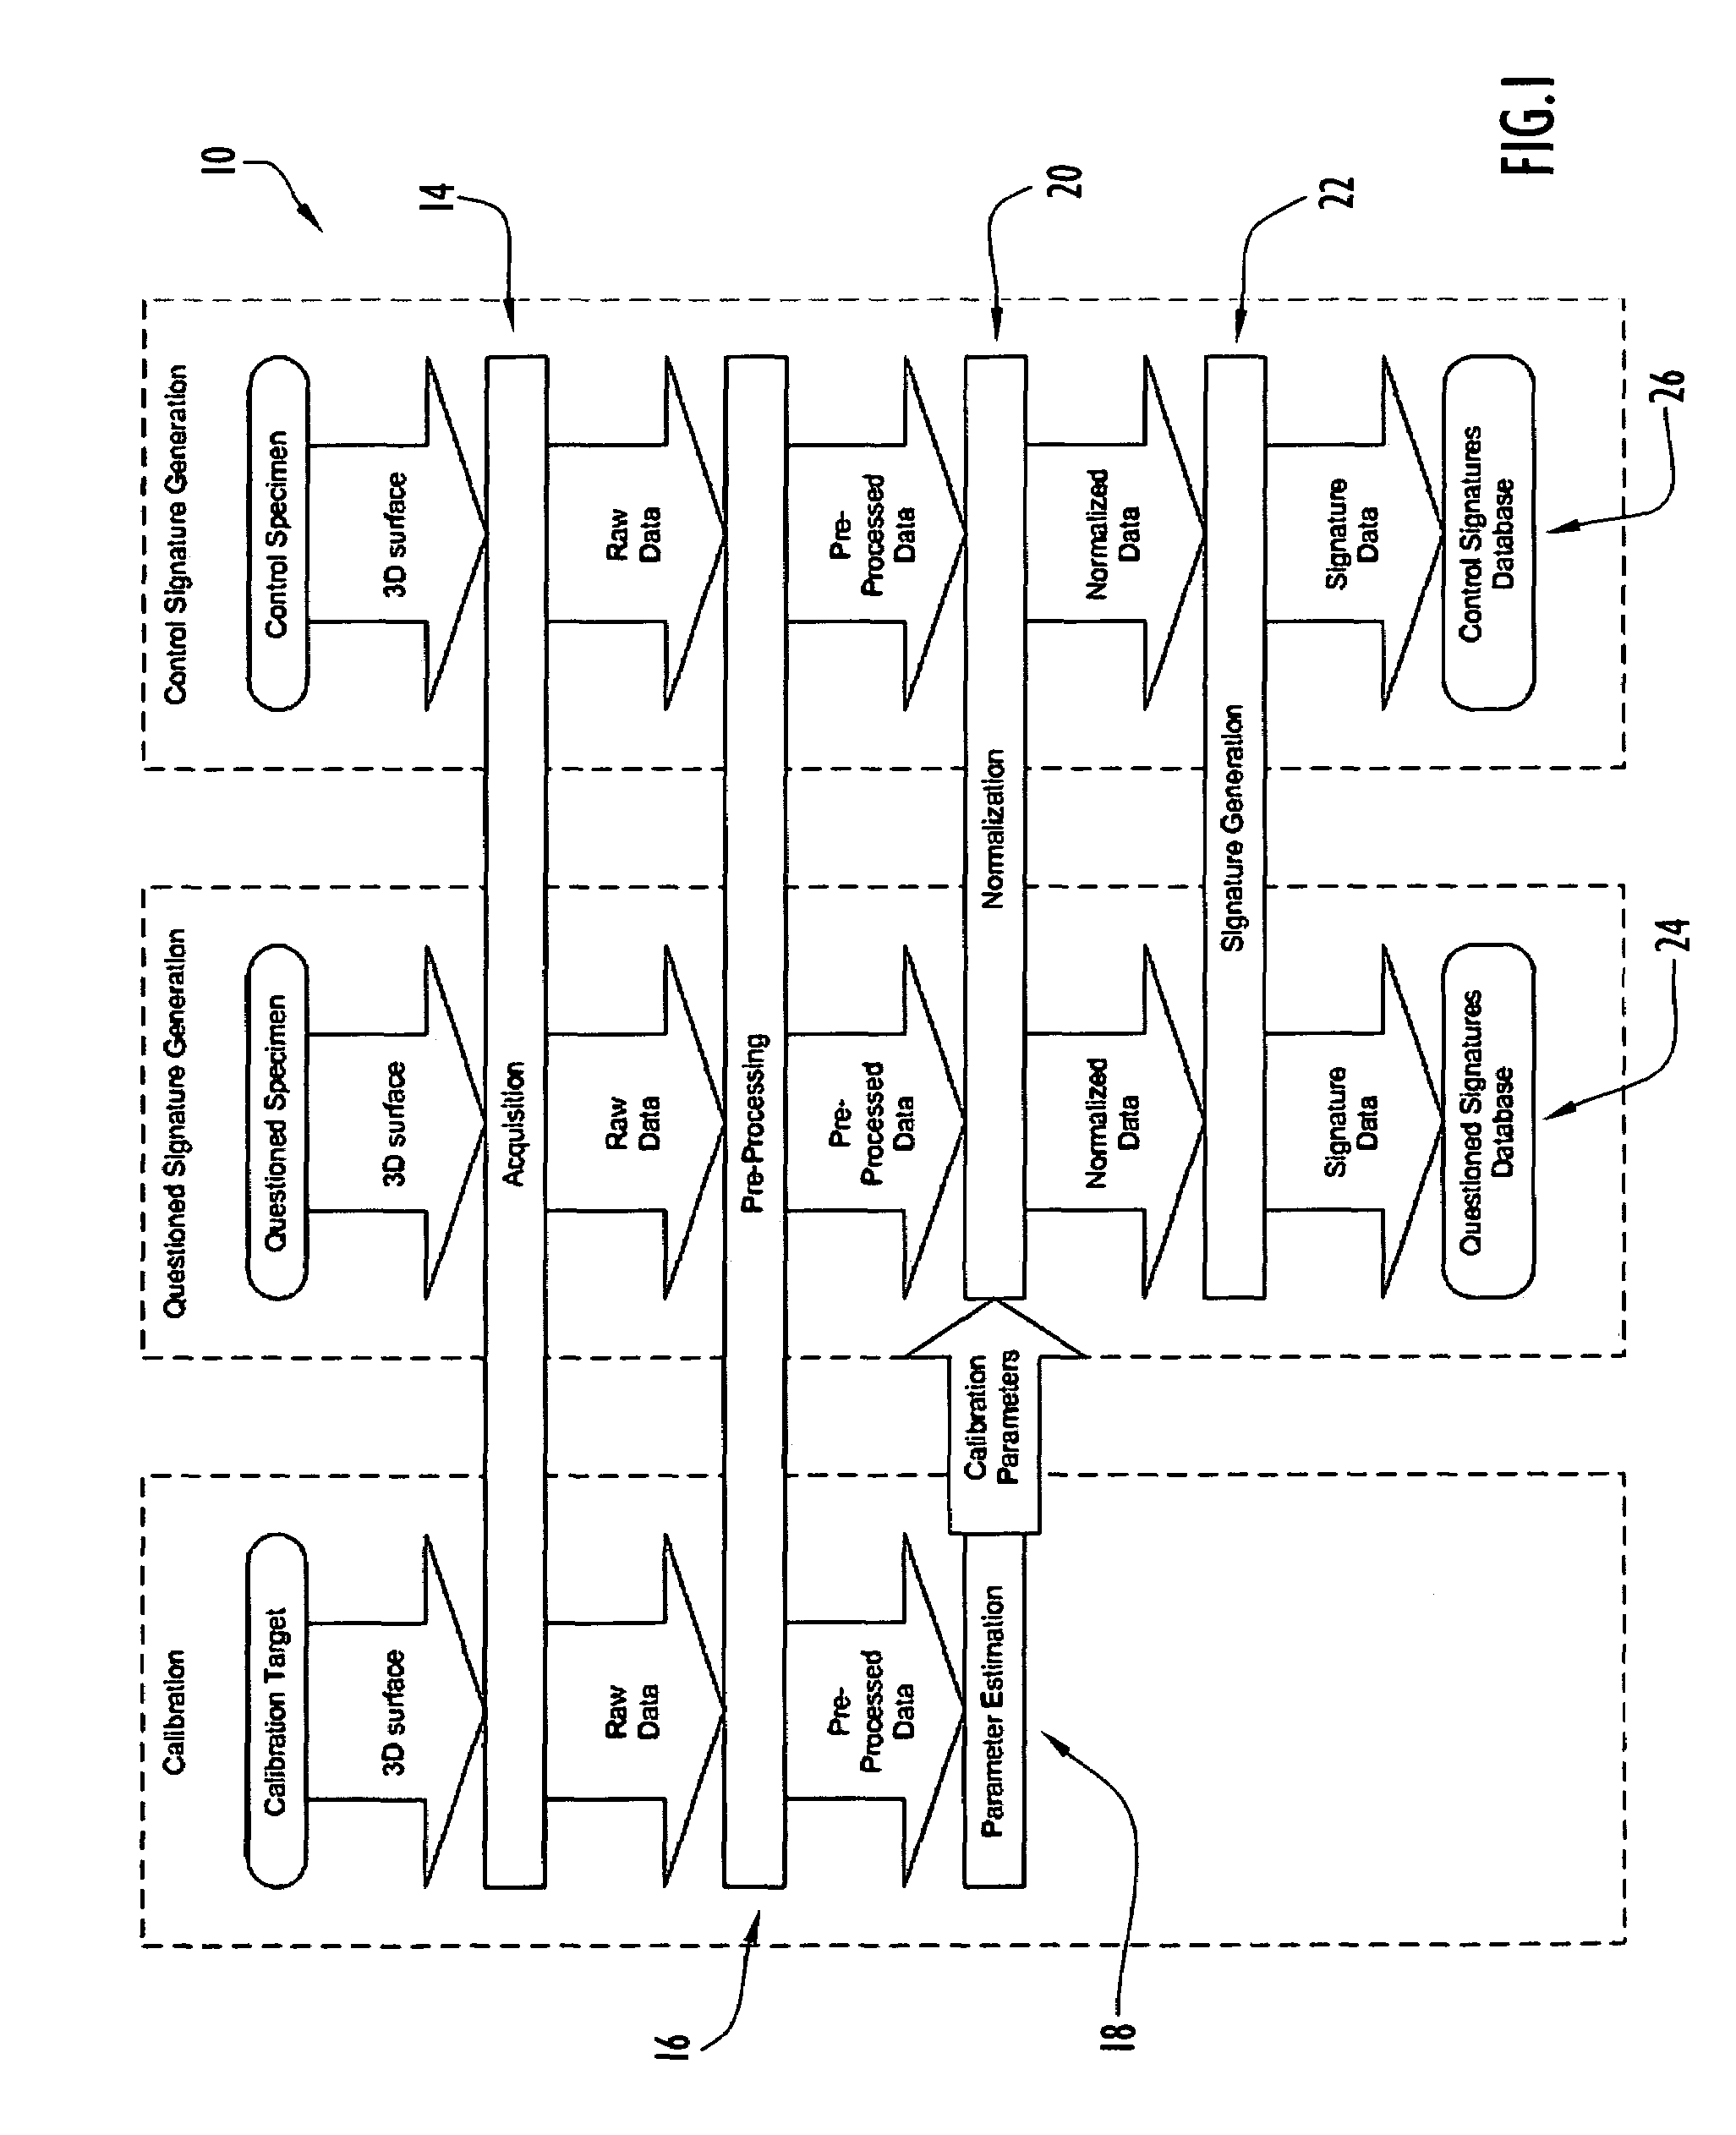 Automated system and method for tool mark analysis